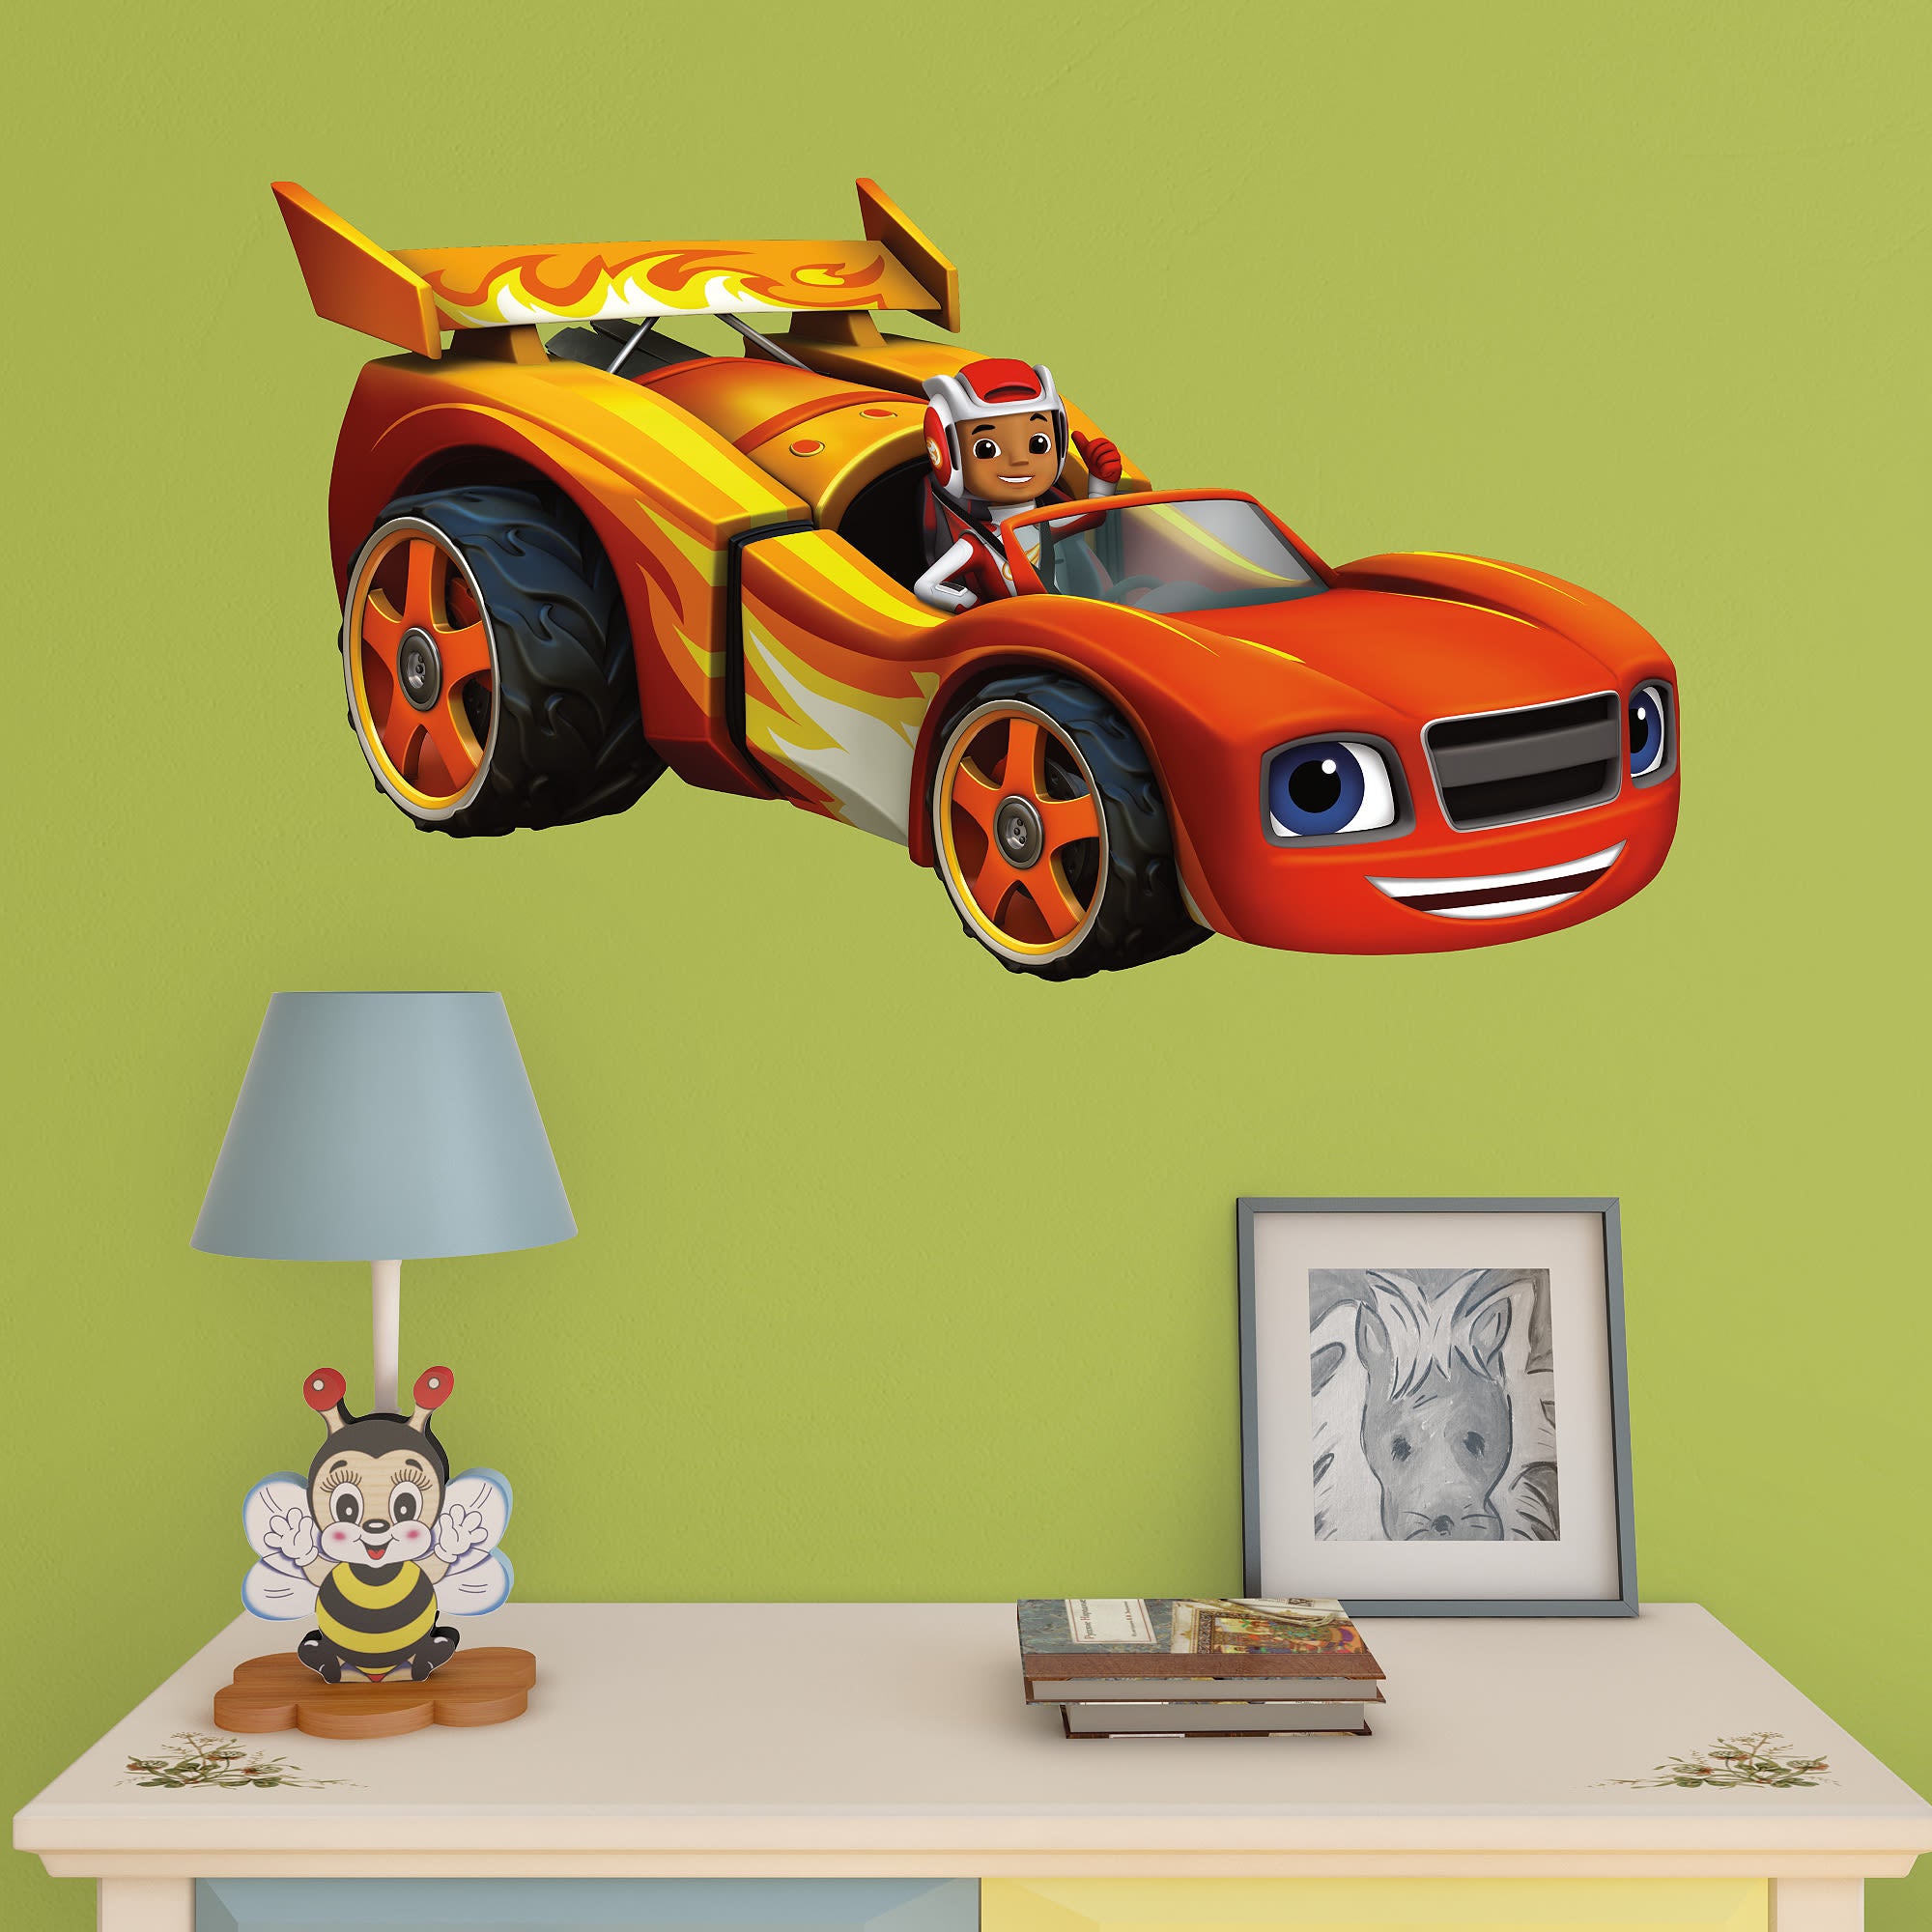 Blaze: Racecar - Officially Licensed Removable Wall Decal 22.0"W x 39.0"H by Fathead | Vinyl